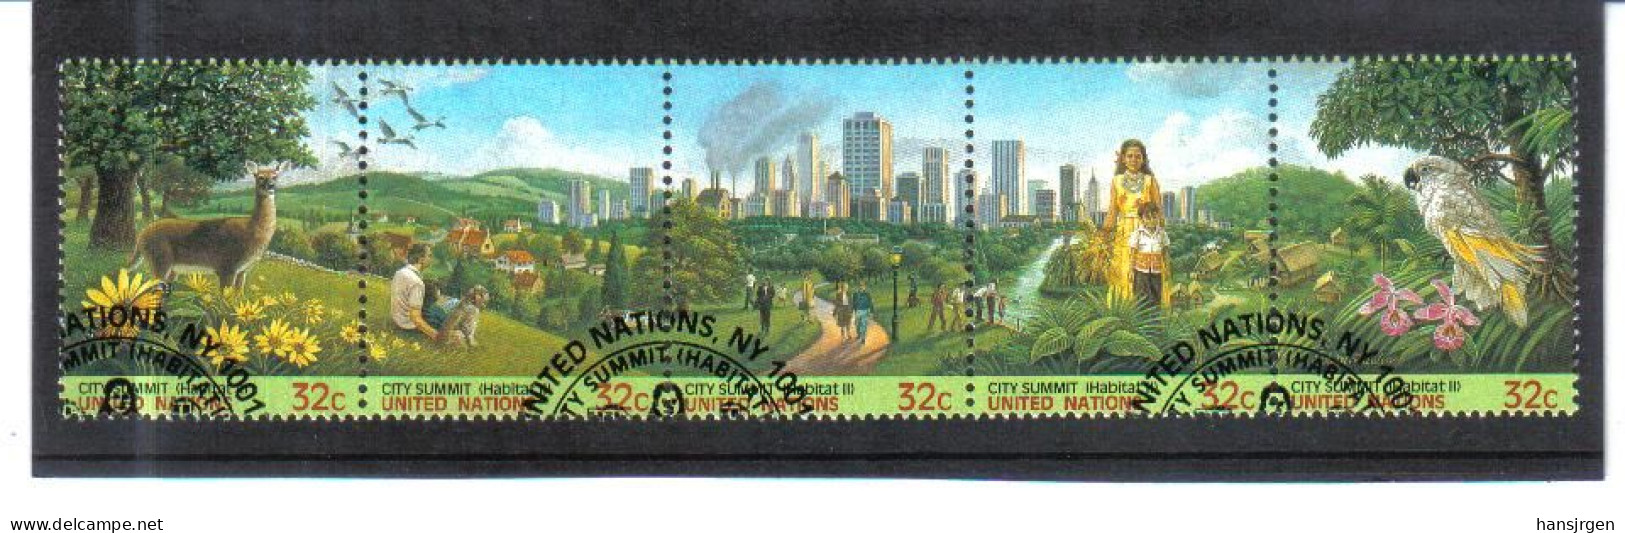 VNG803 UNO NEW YORK 1996 MICHL 711/15 Gestempelt Siehe ABBILDUNG - Used Stamps